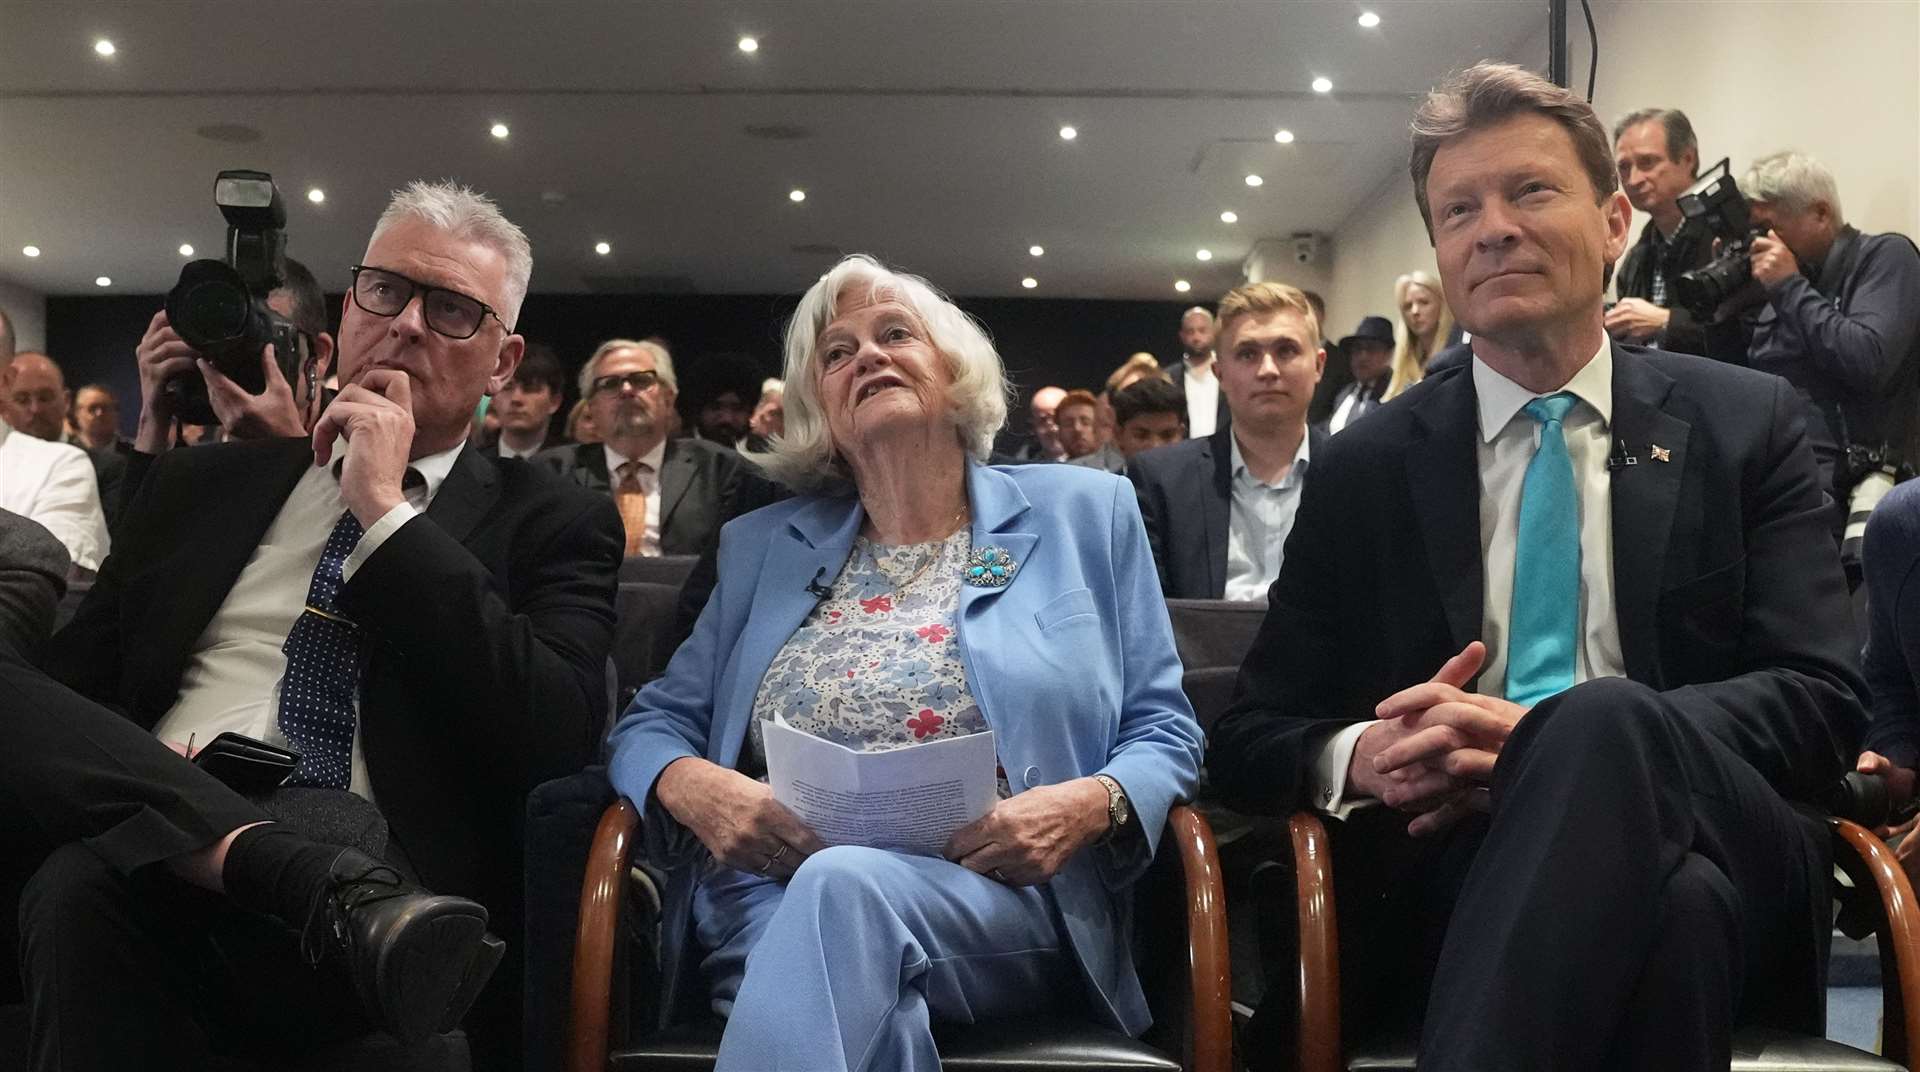 From left, Ashfield MP Lee Anderson, Ann Widdecombe and leader of Reform UK Richard Tice launch the party’s General Election campaign where Mr Tice hit out at high levels of net migration, establishment ‘experts’ and the ‘weak, feeble politicians who have broken Britain’ (Lucy North/PA)